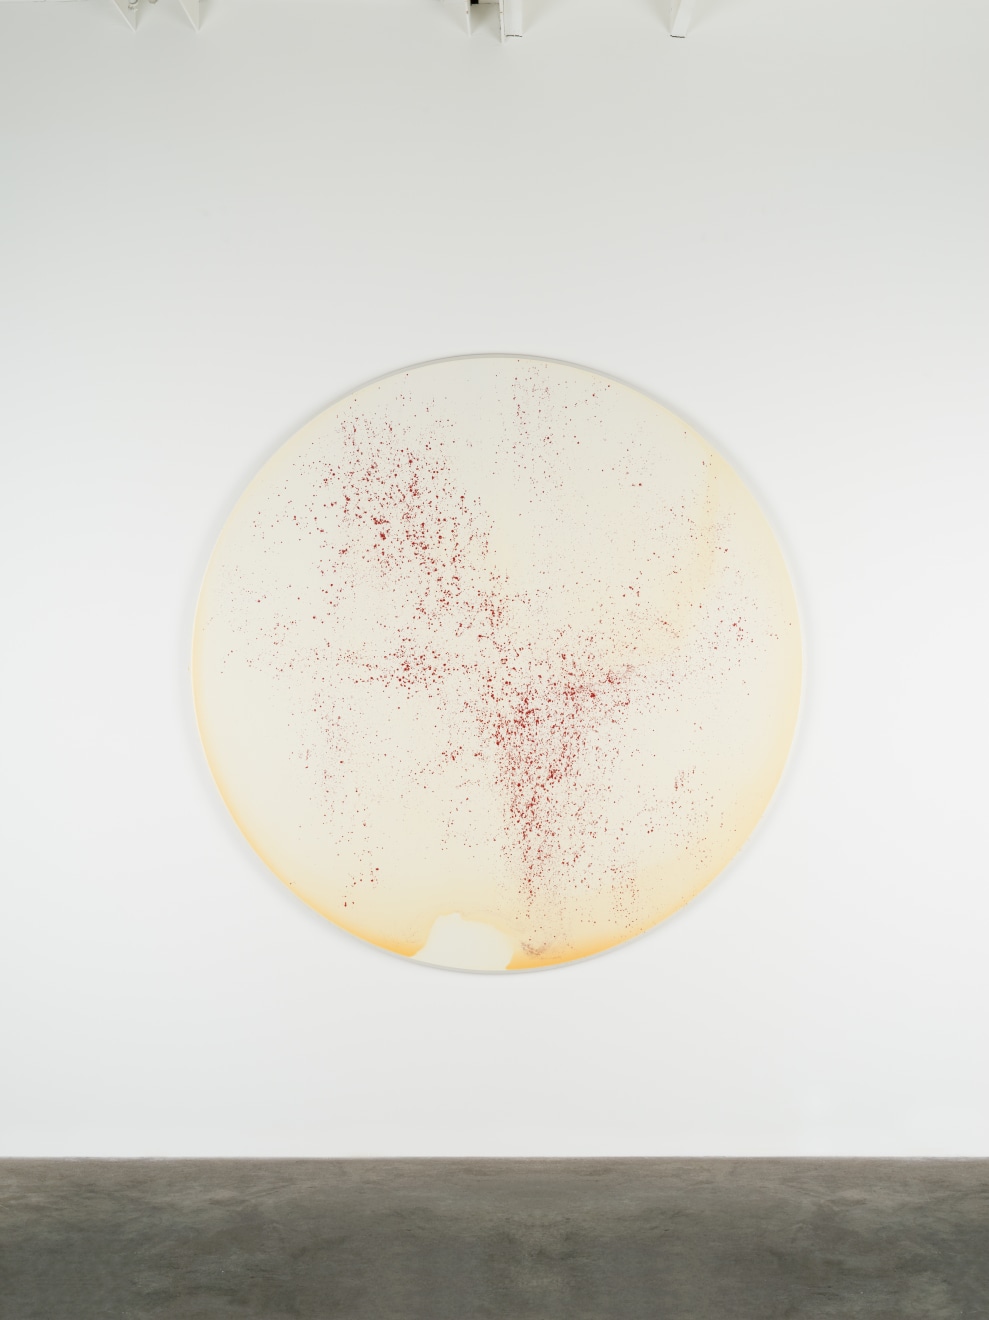 Callum Innes Untitled, 2022 signed by the artist, verso oil and shellac on Birch Ply 70 7/8 inches (180 cm) diameter (CI-TP.31.22)